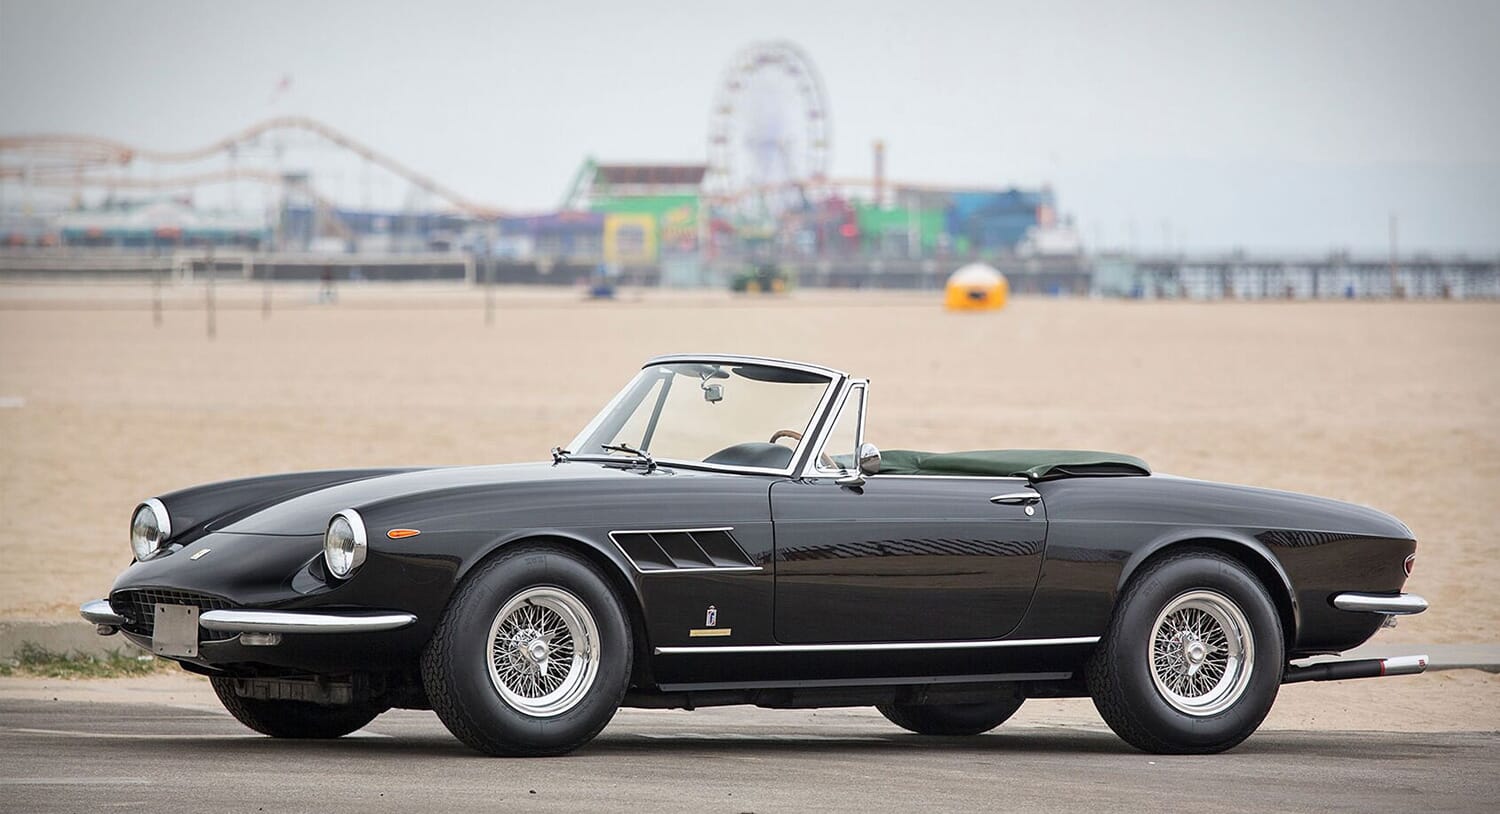 Drive Away In This Extra-Special 1967 Ferrari 330 GTS